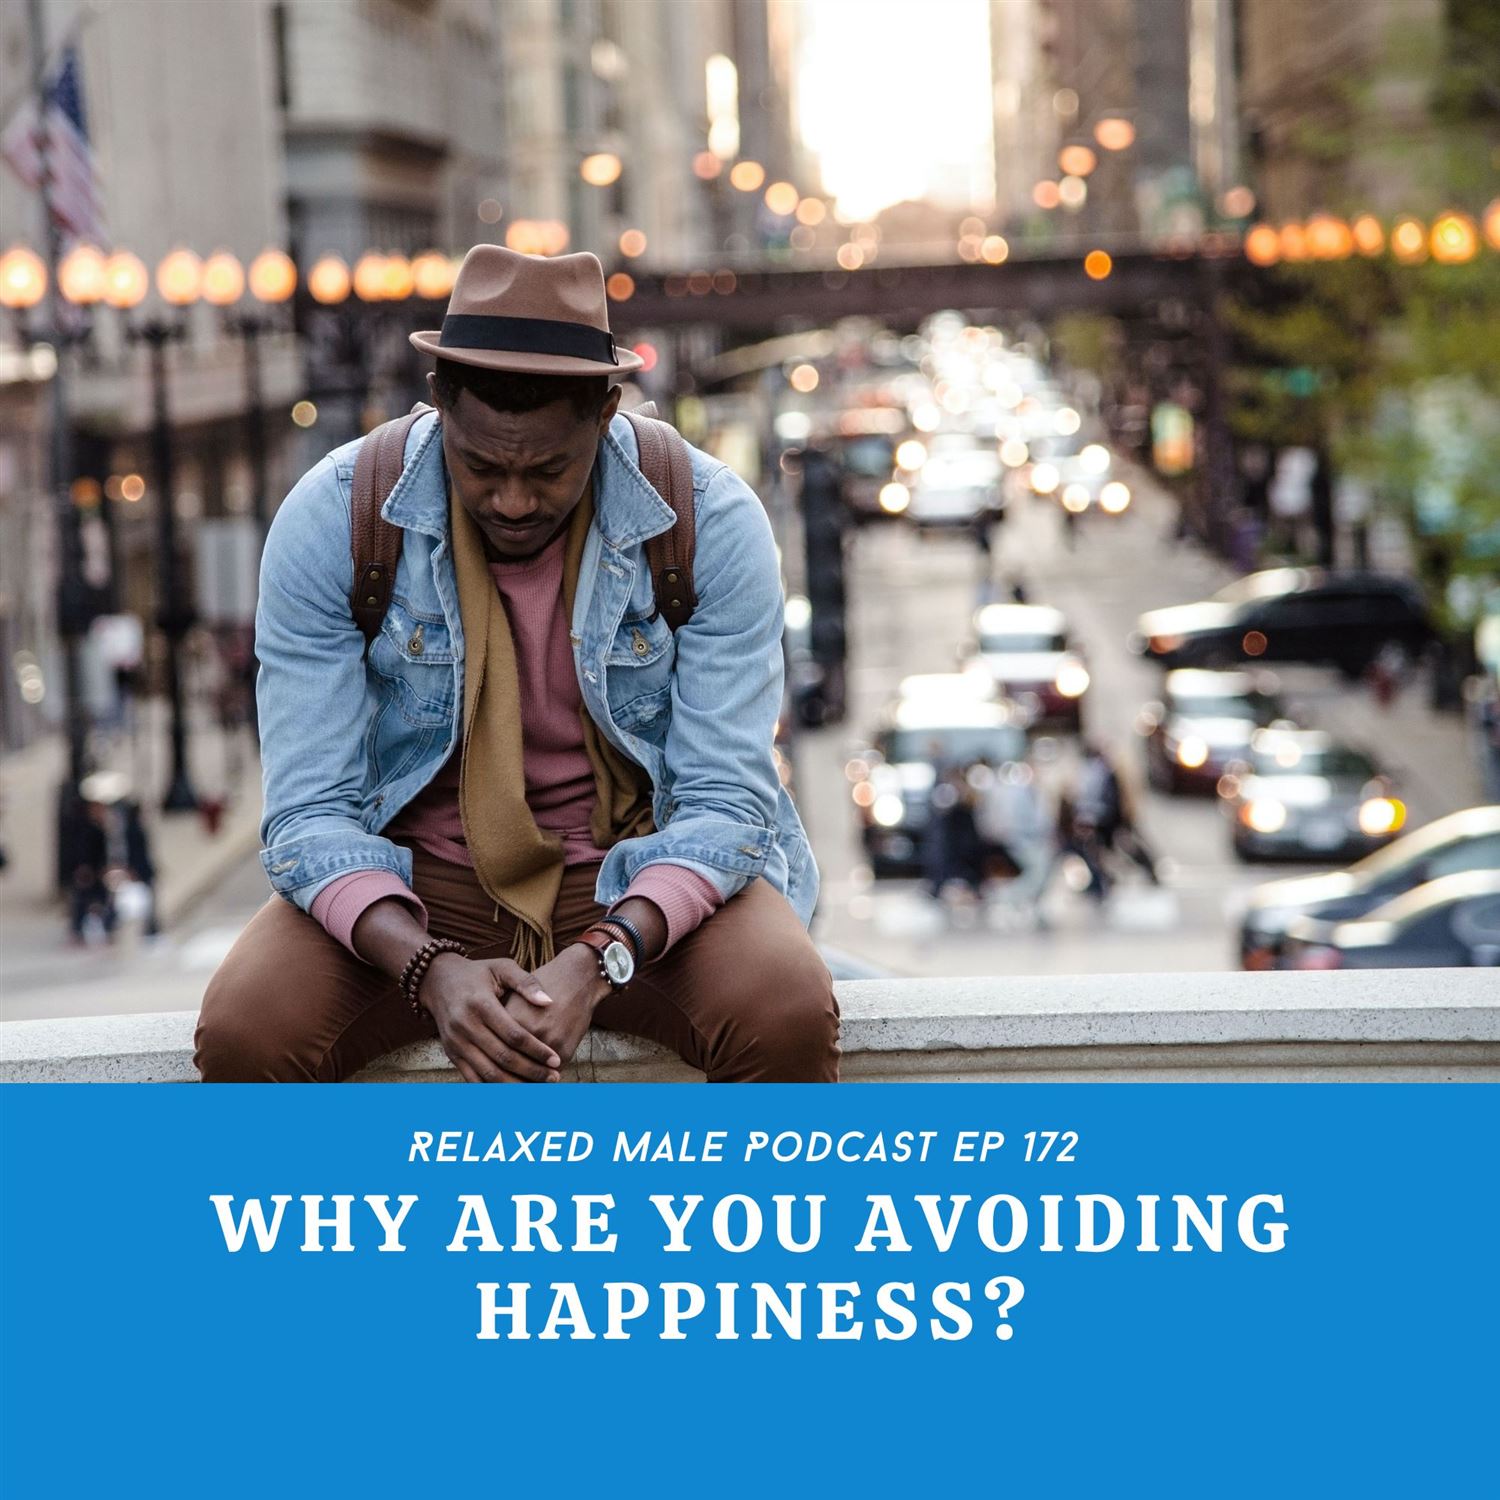 Why are you avoiding happiness?